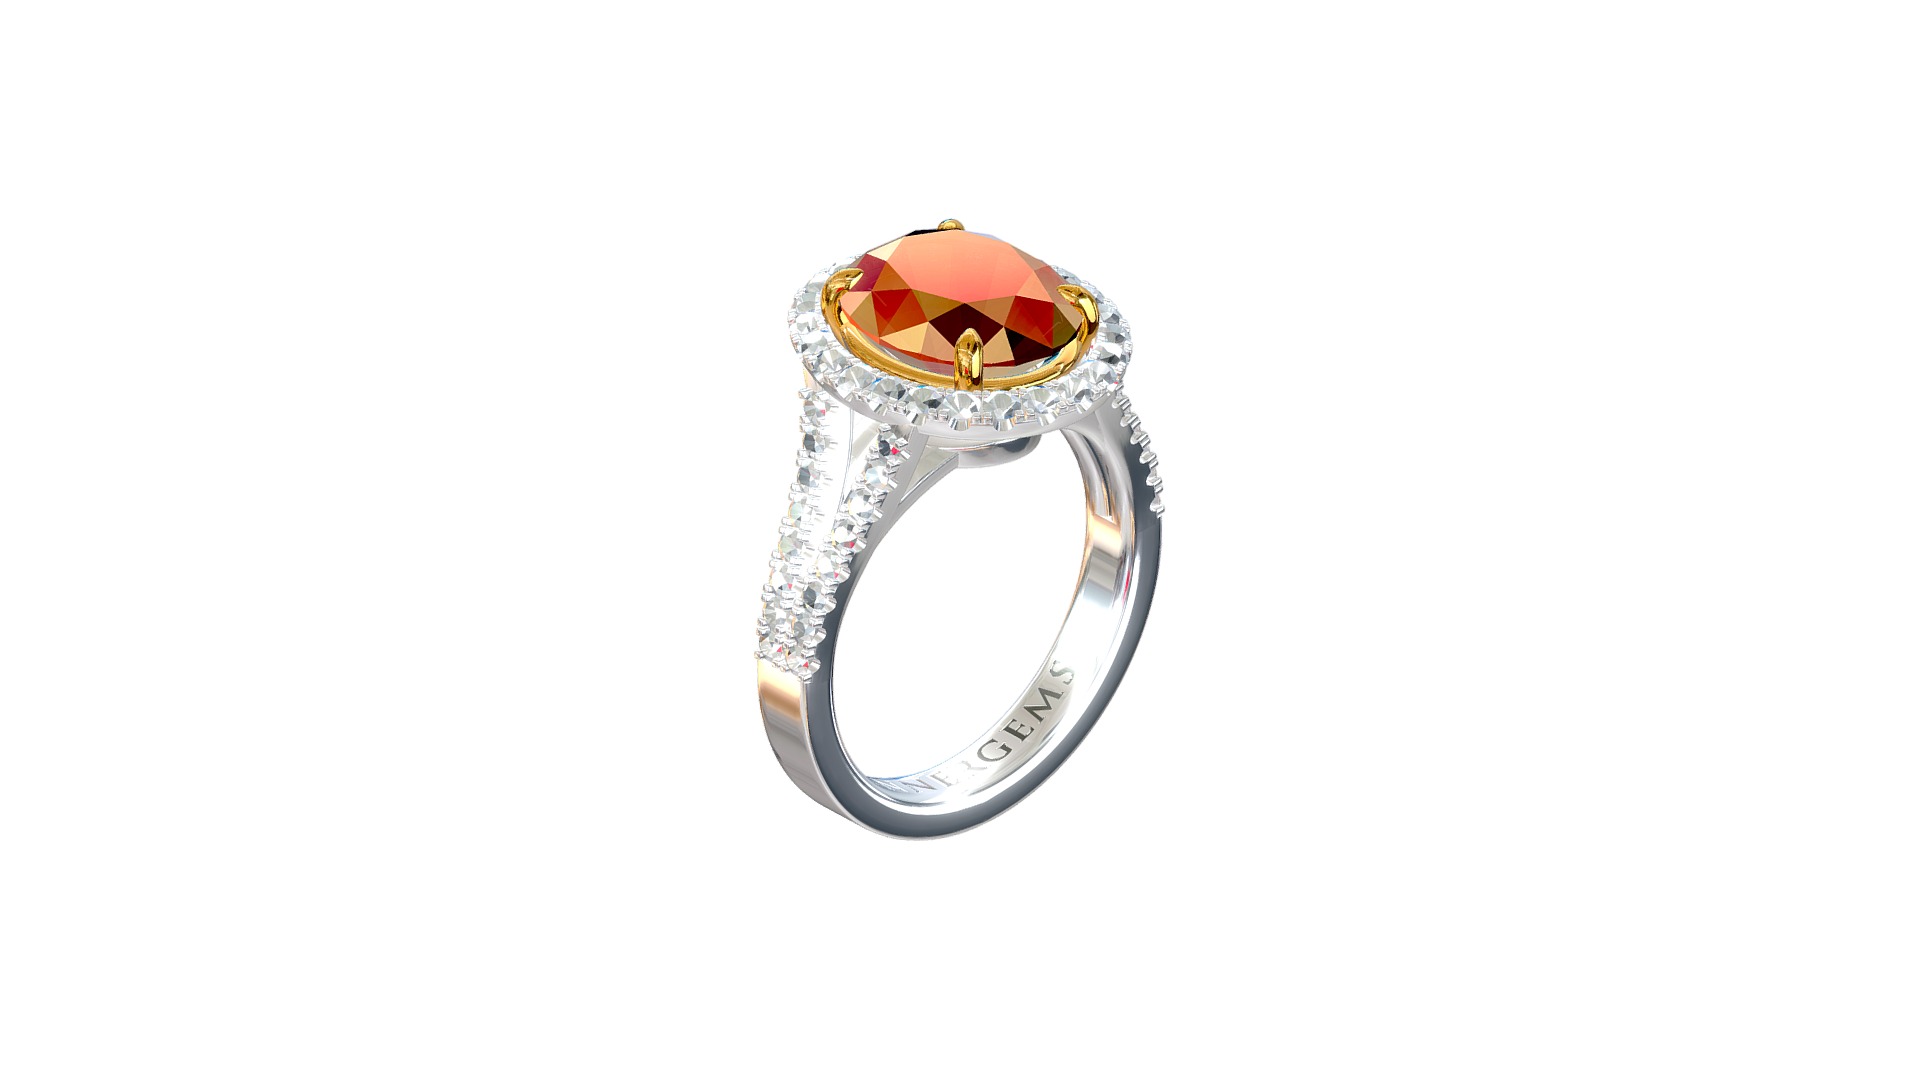 3D model SGO378 - This is a 3D model of the SGO378. The 3D model is about a ring with a red and white design.